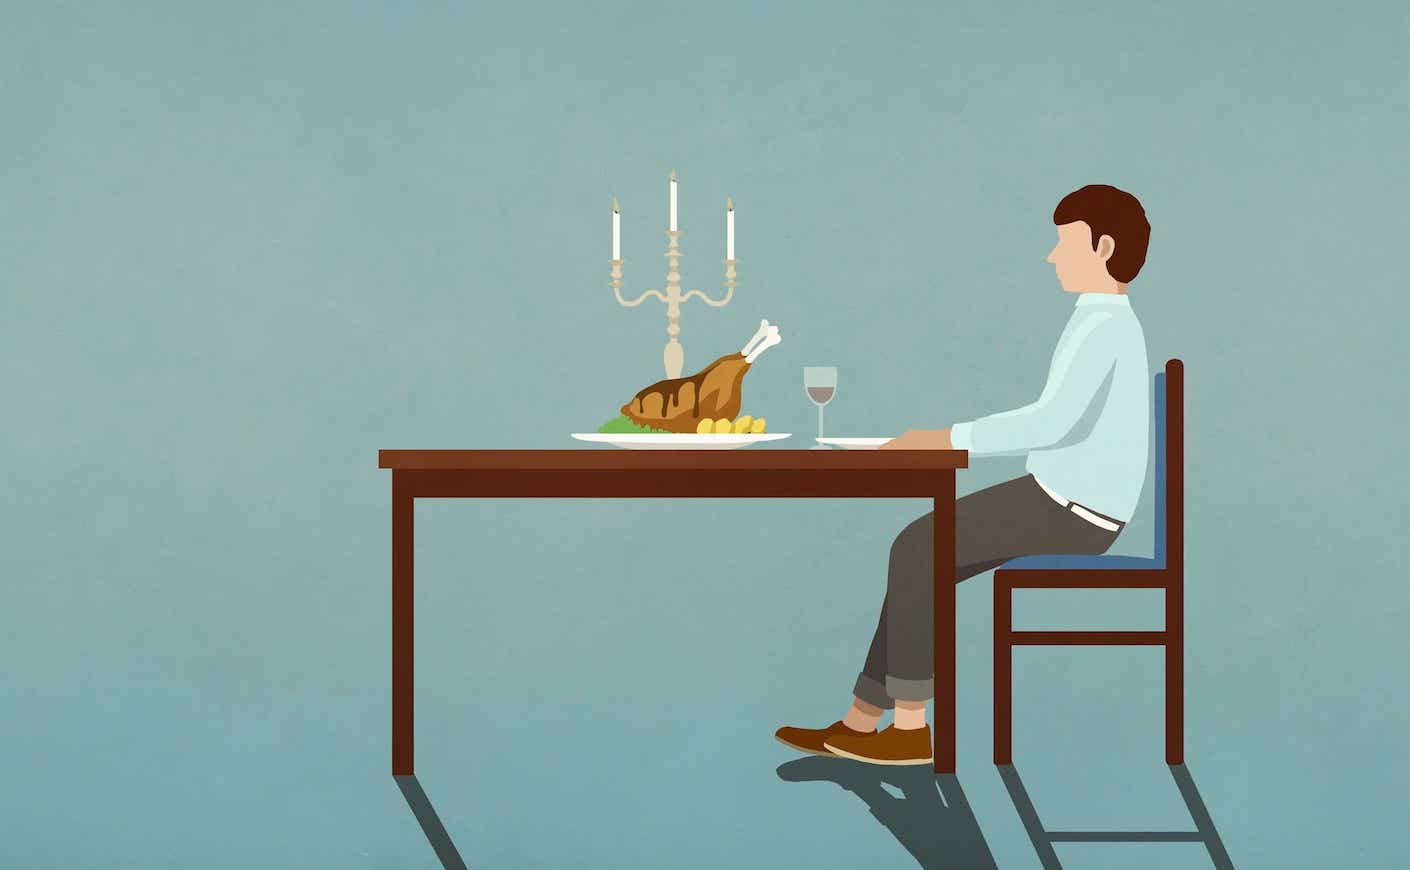 illustration of a man sitting at a dinner table alone